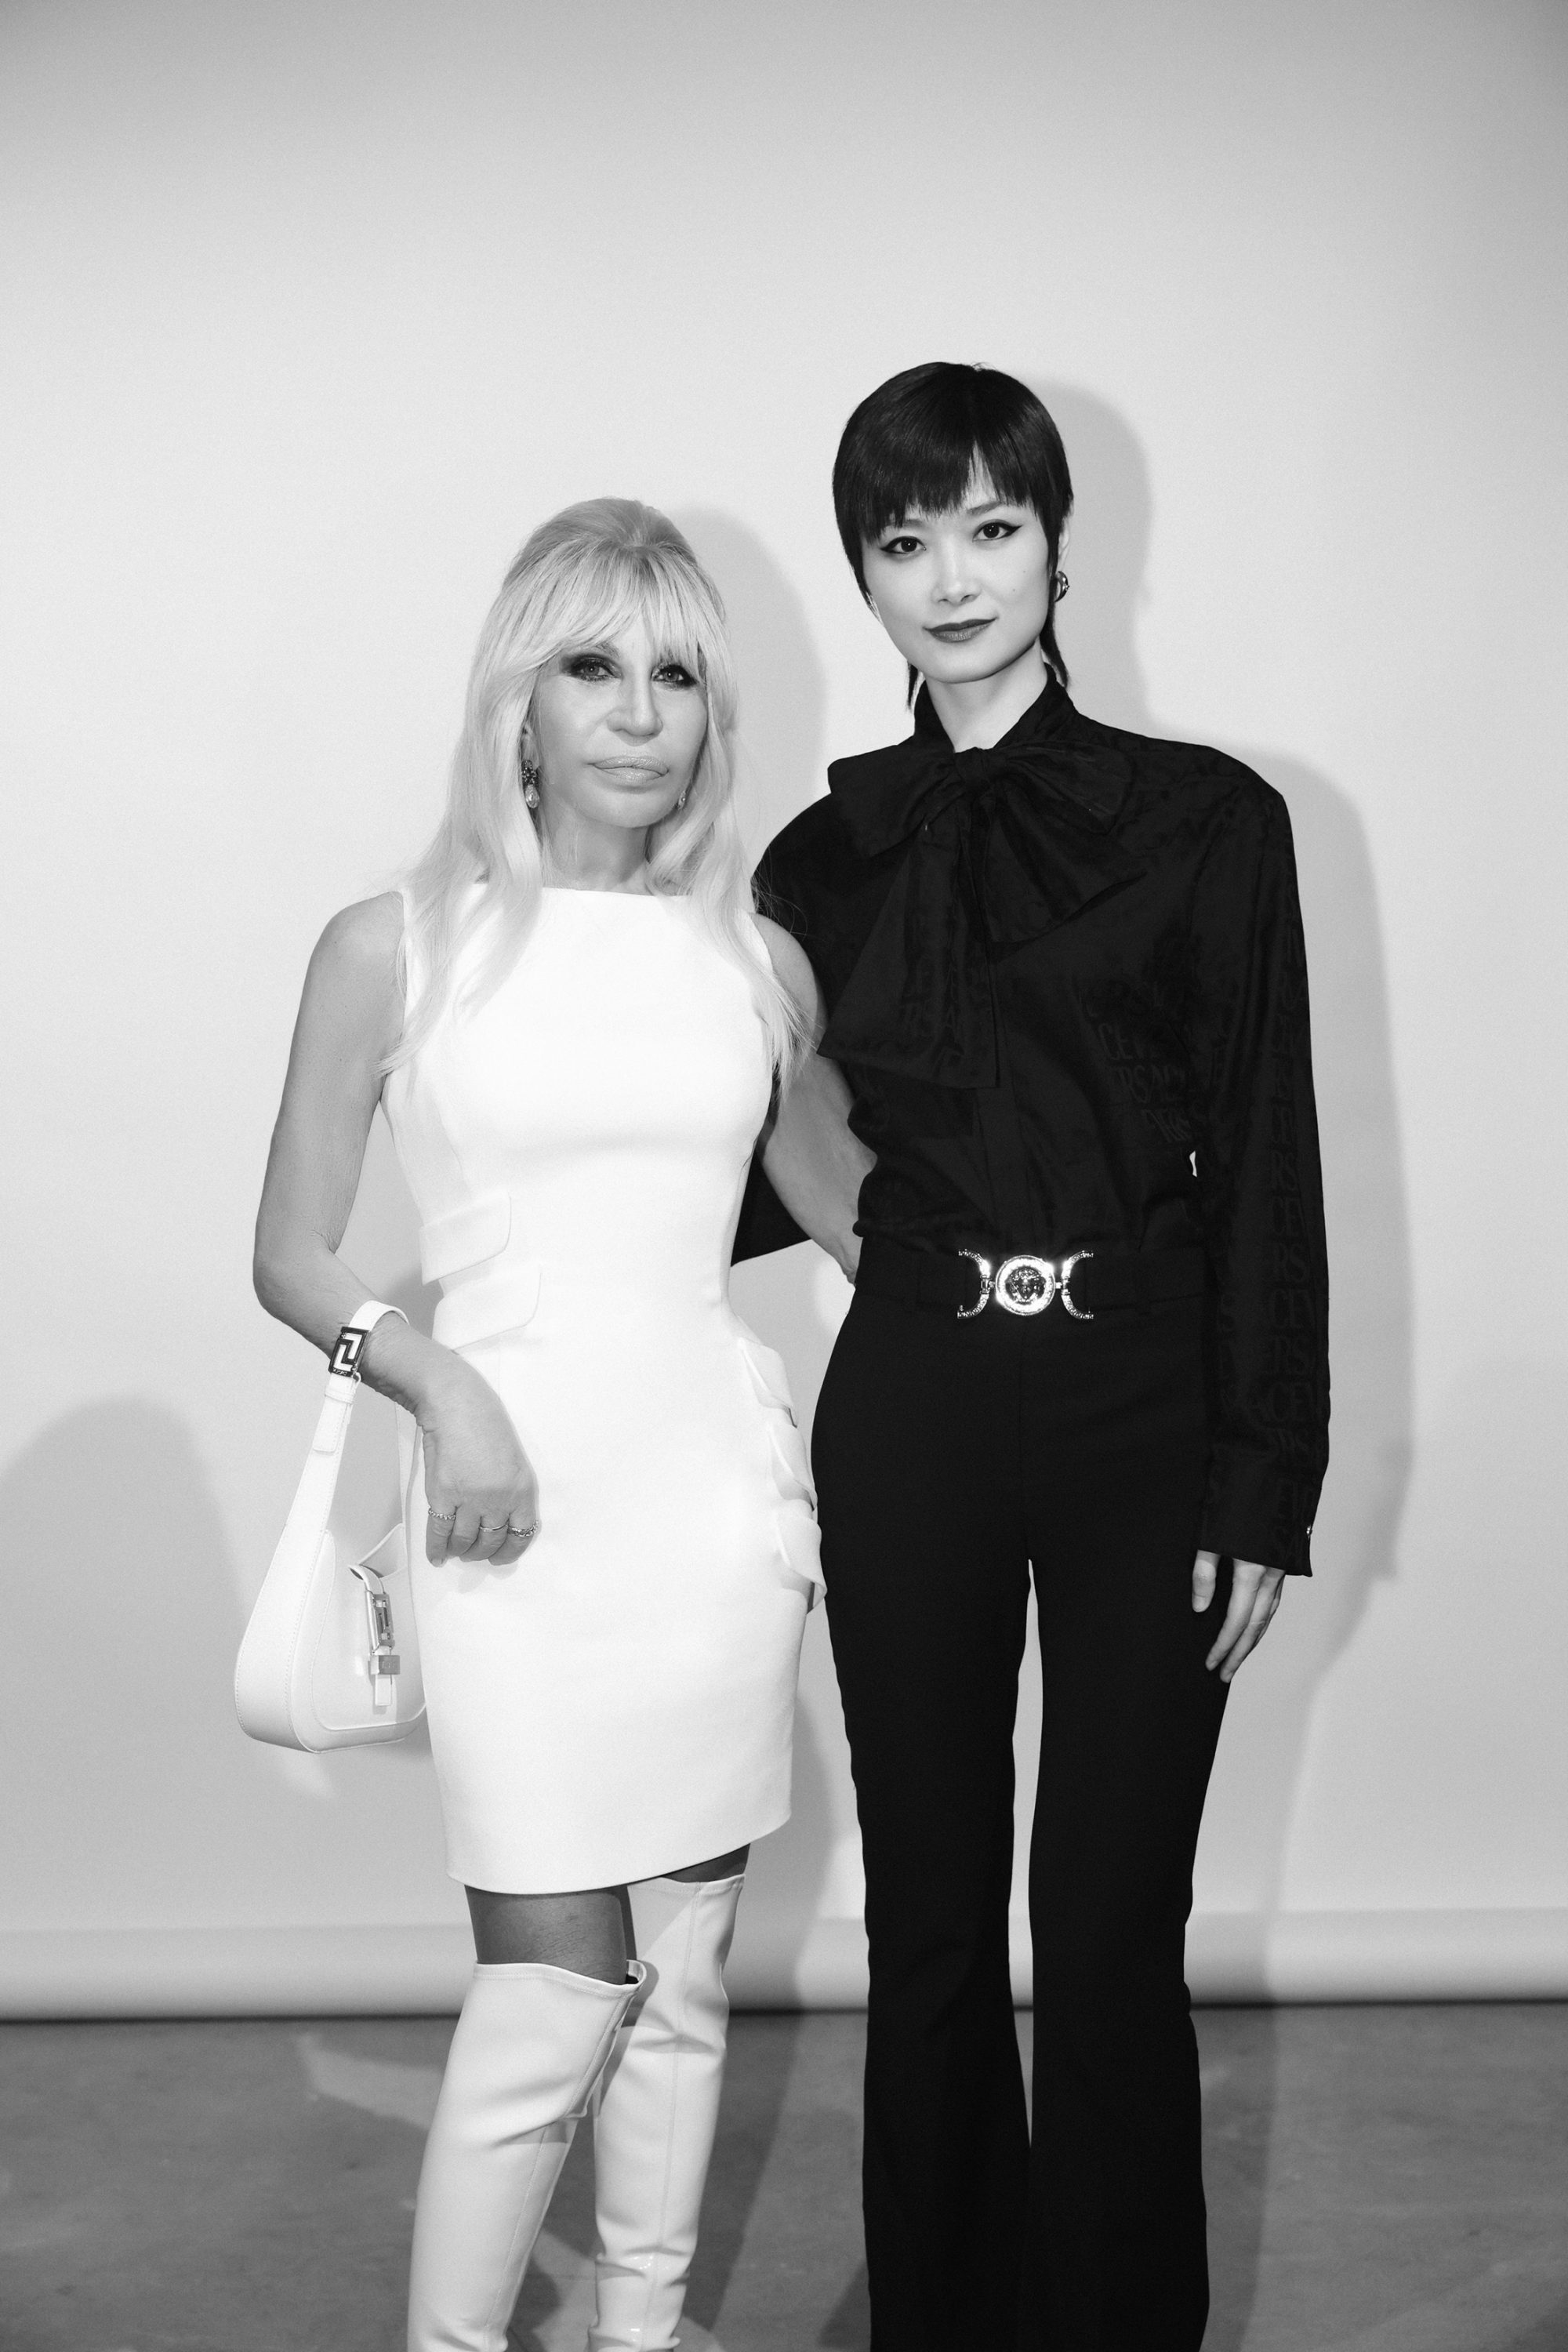 In New York, Donatella Versace and Anne Hathaway Hosted an Intimate Icons  Dinner